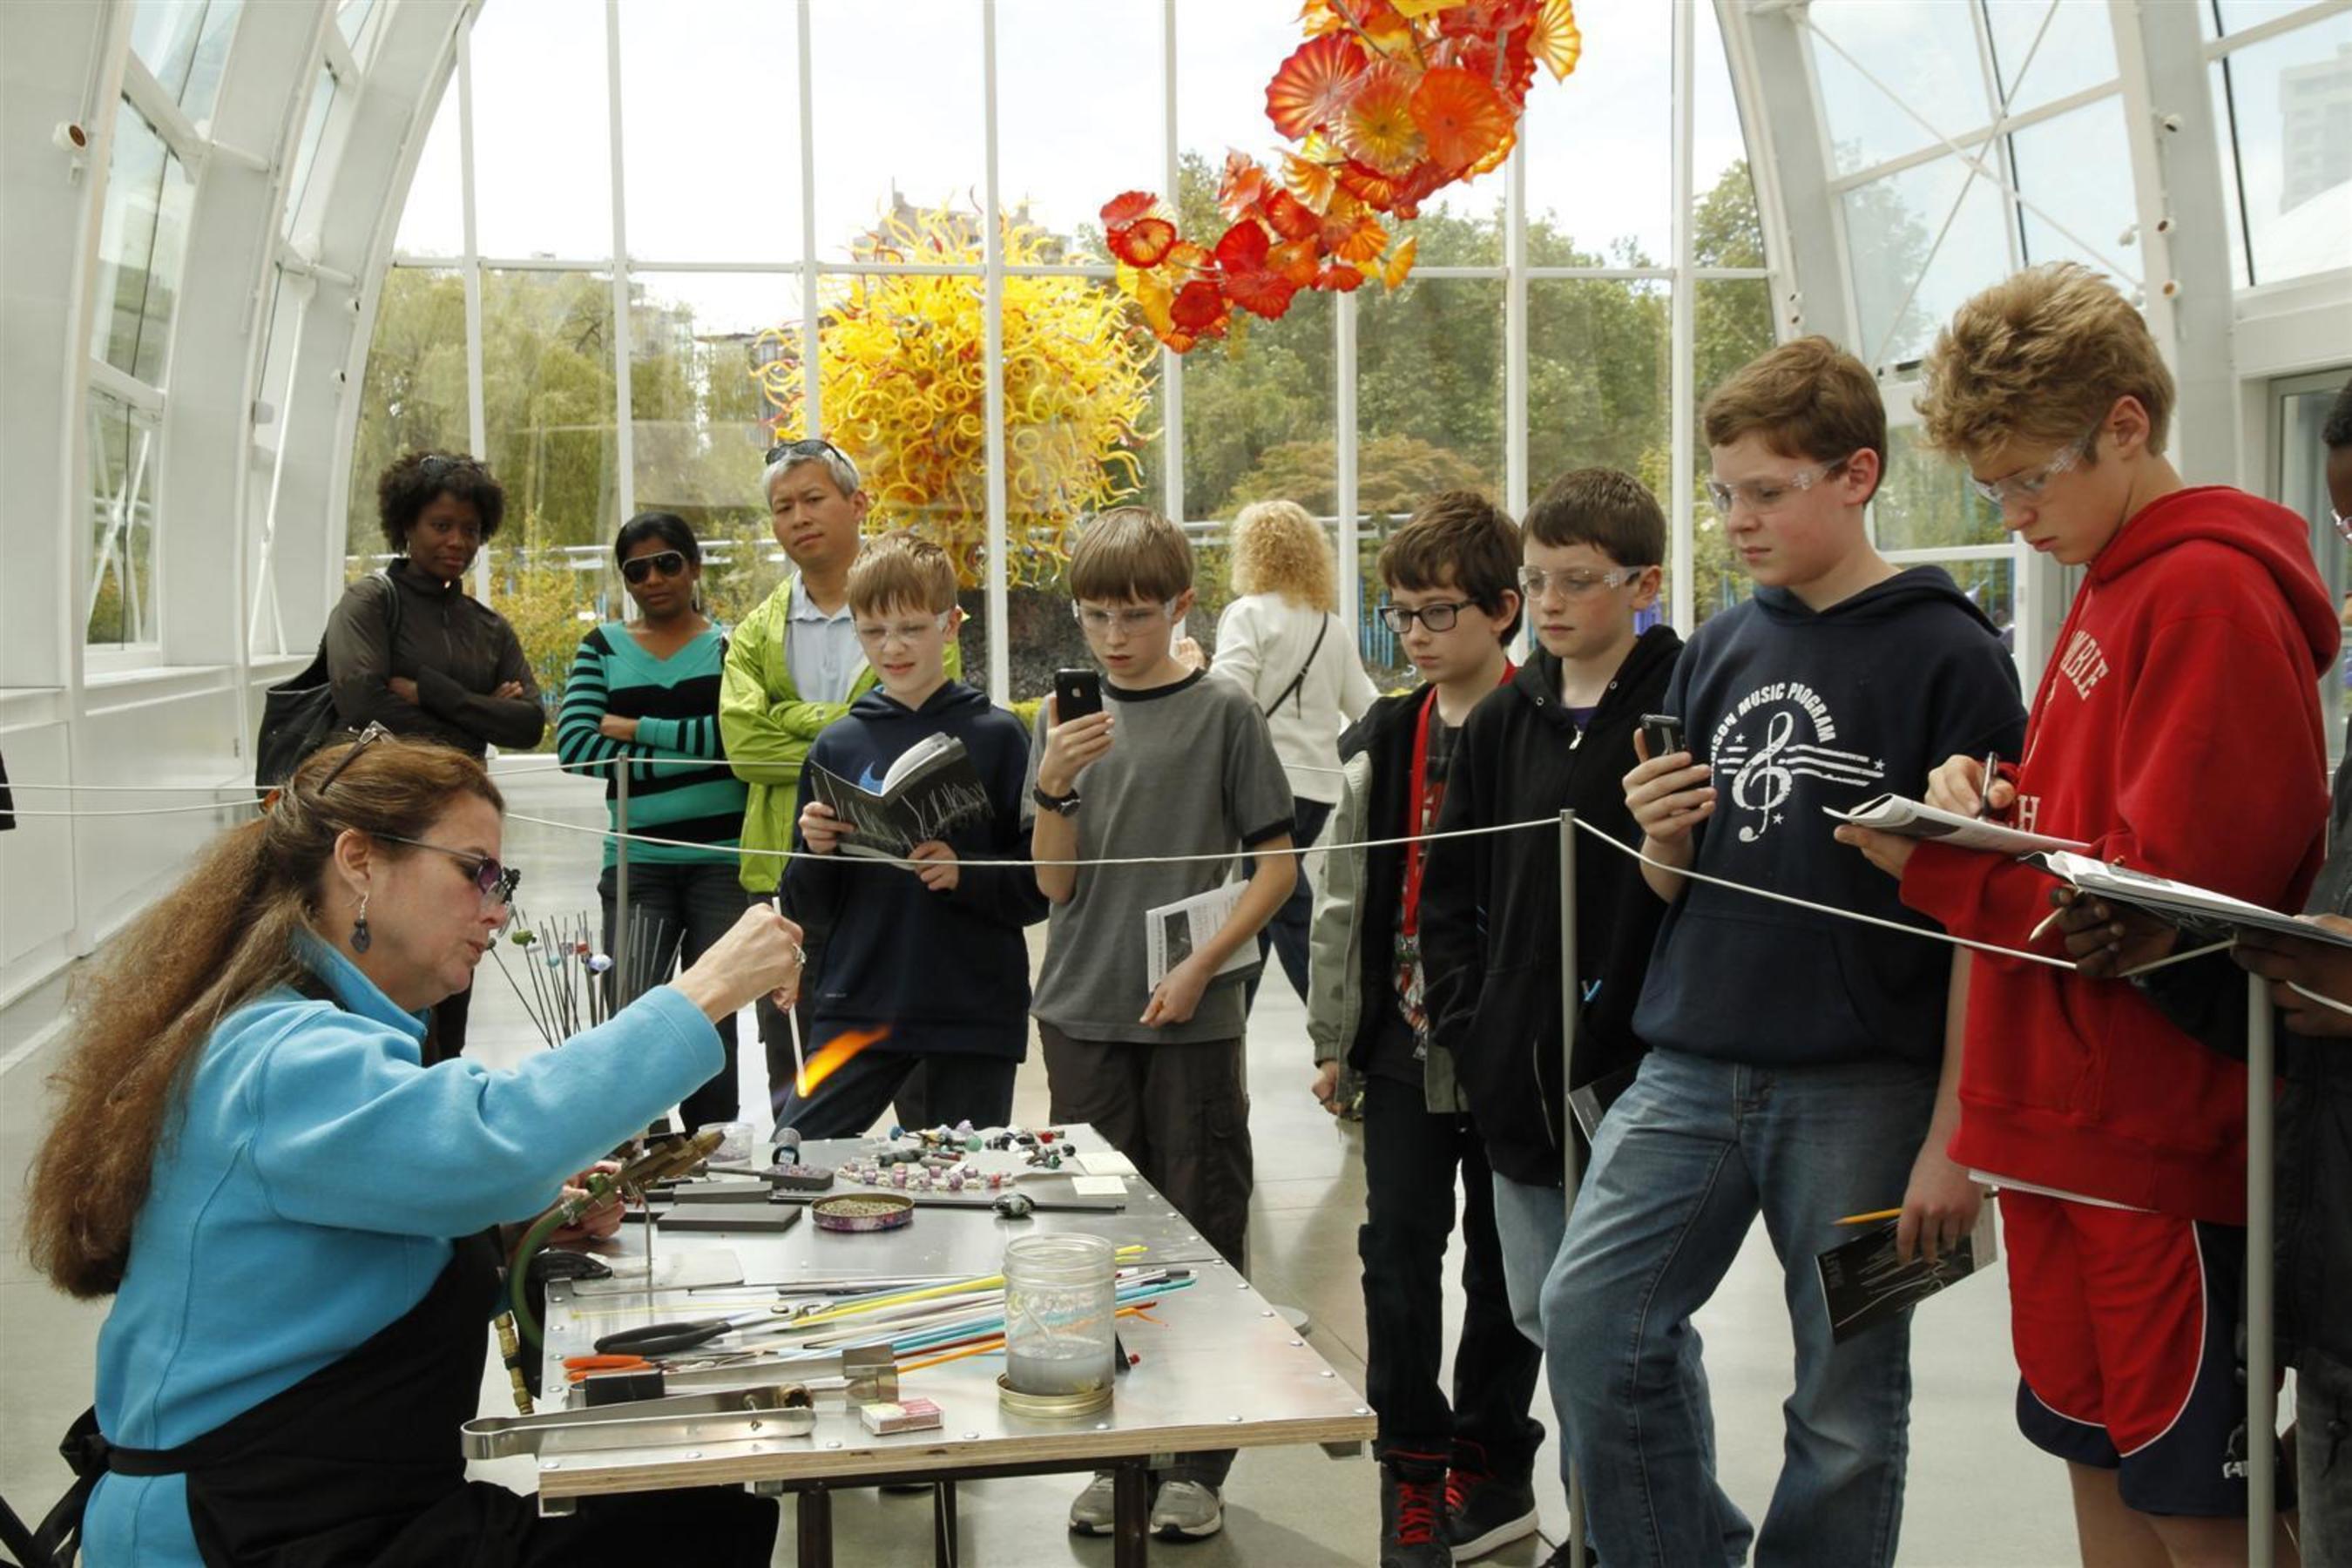 Seattle area sixth graders view the science of glass in the renowned Glass House at Chihuly Garden and Glass. (PRNewsFoto/Chihuly Garden and Glass)